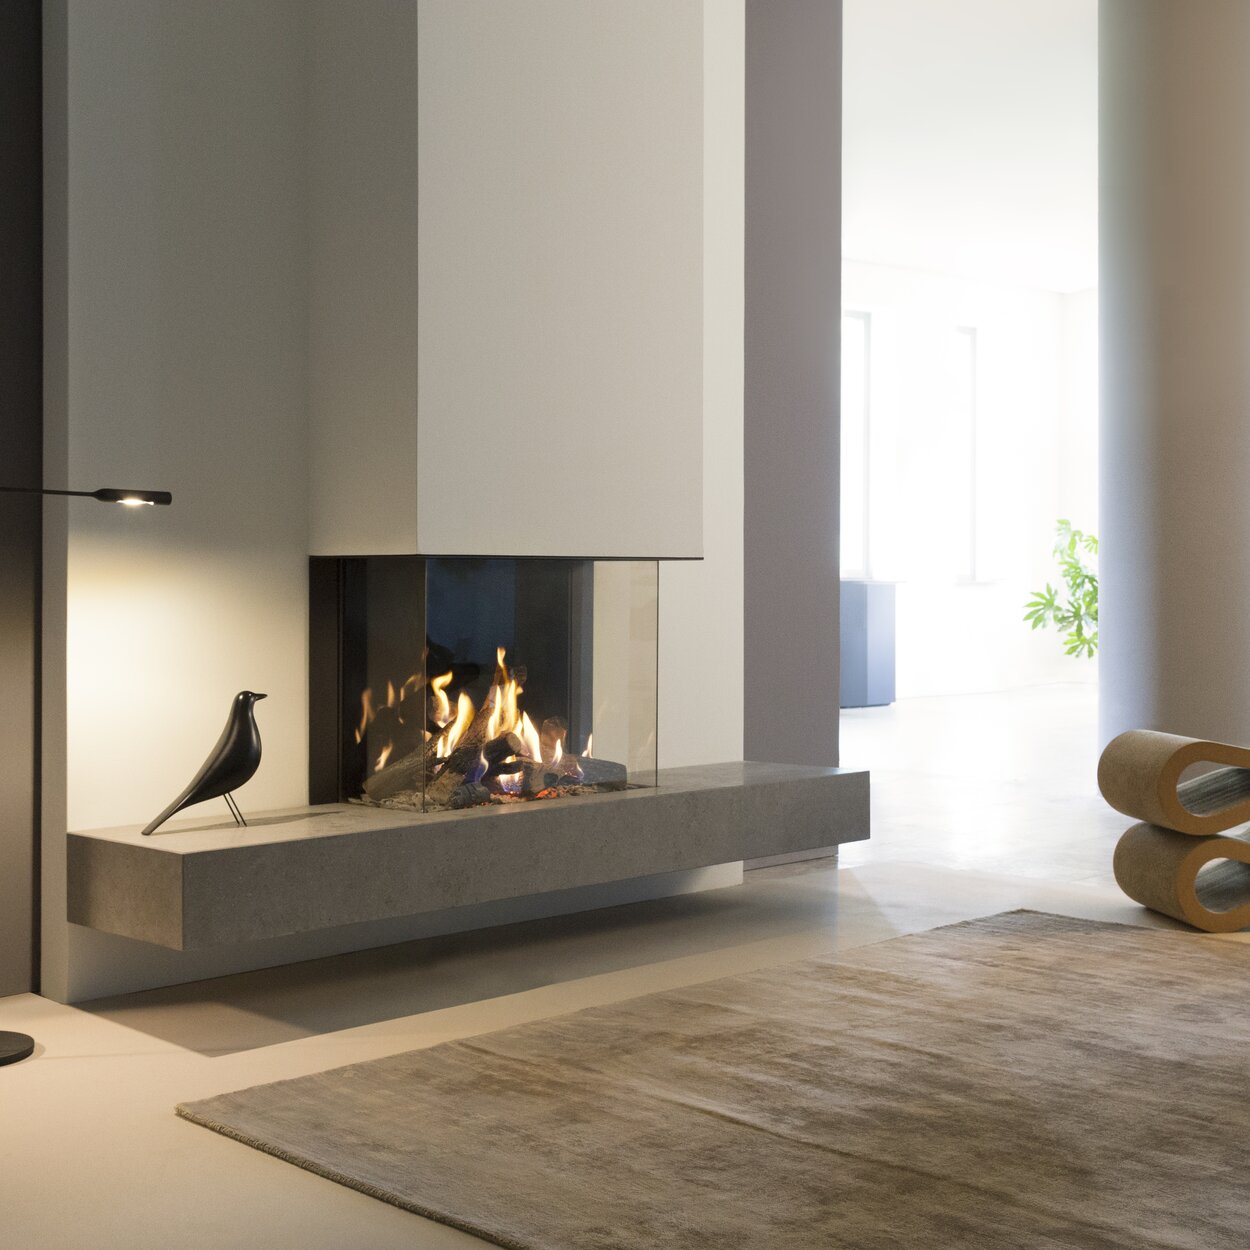 Gas fireplace GP70/55S 3-sided glazed in white wall installed in modern living room with beige tones